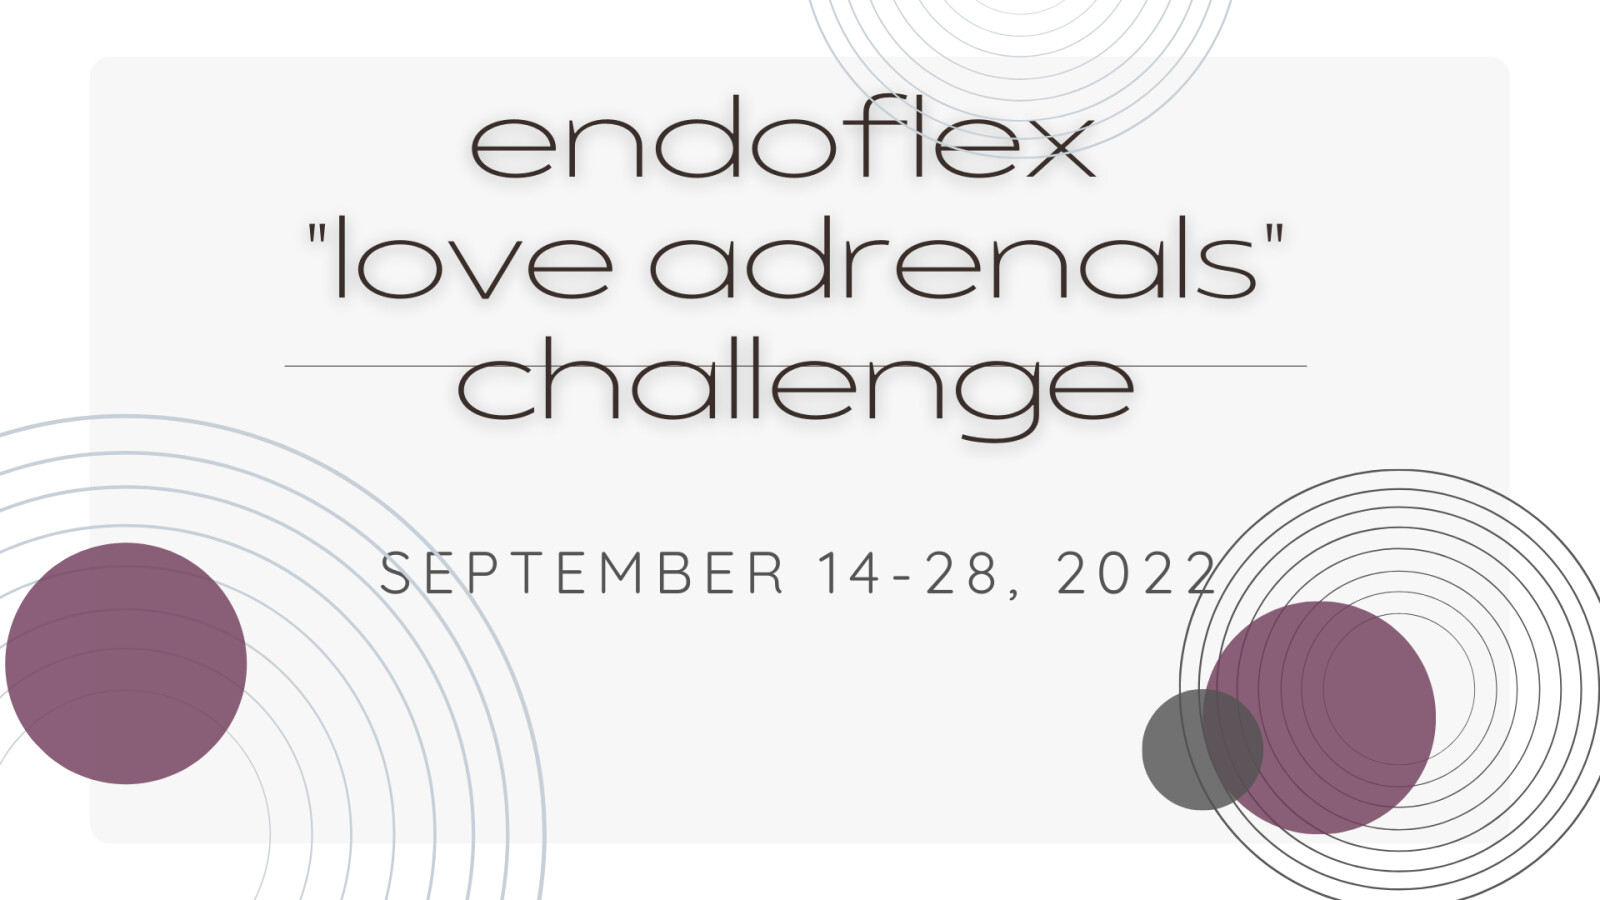 Adrenal Exhaustion is Rampant!